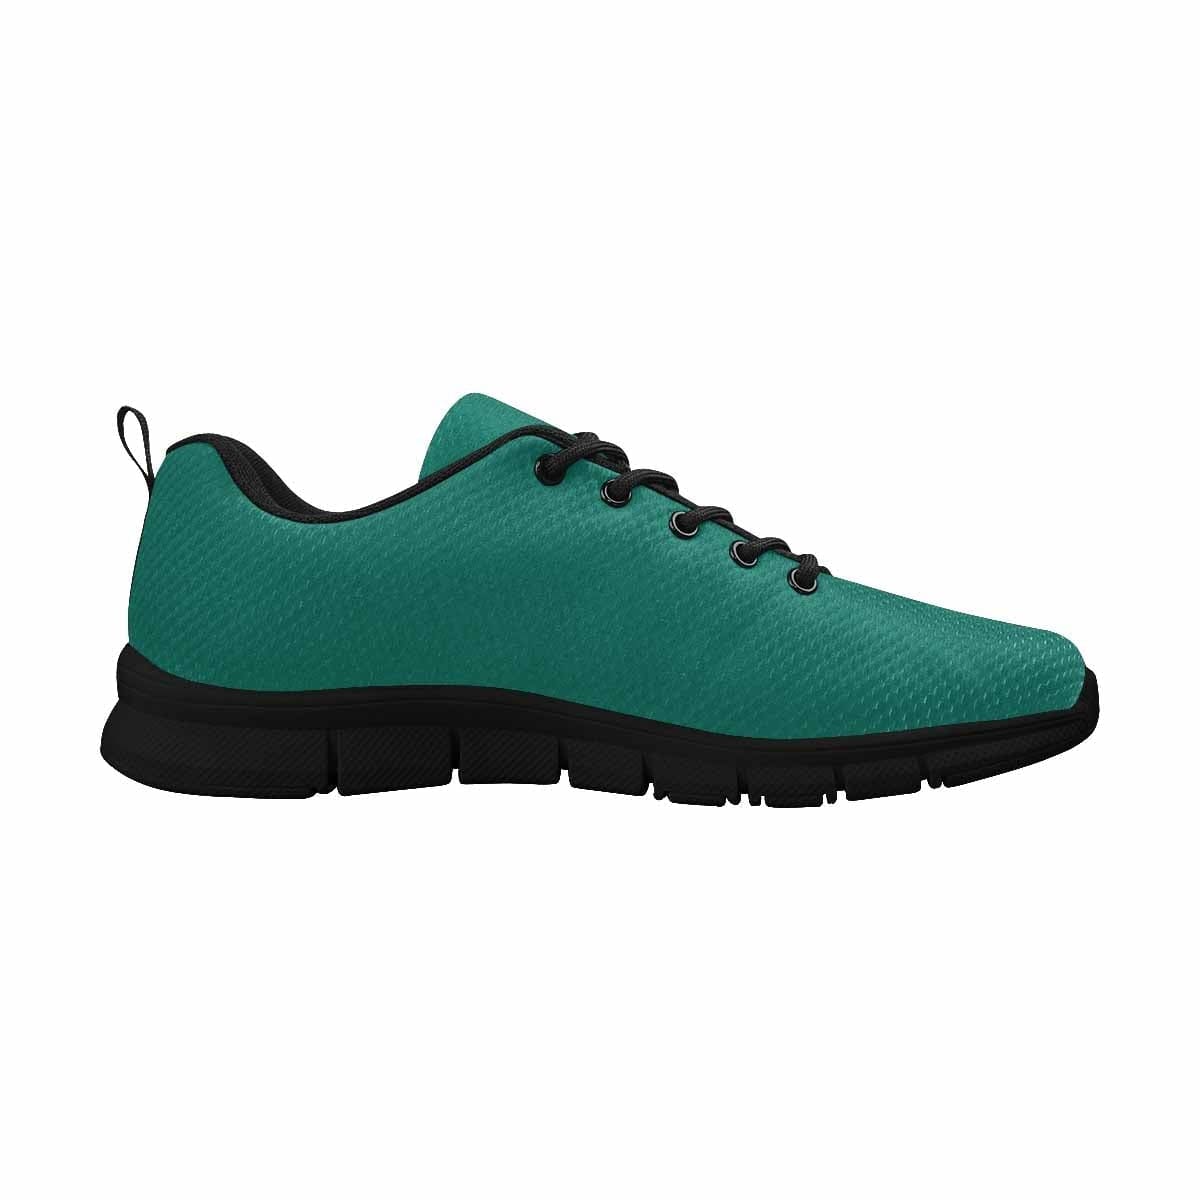 Sneakers For Women Teal Green - Womens | Sneakers | Running